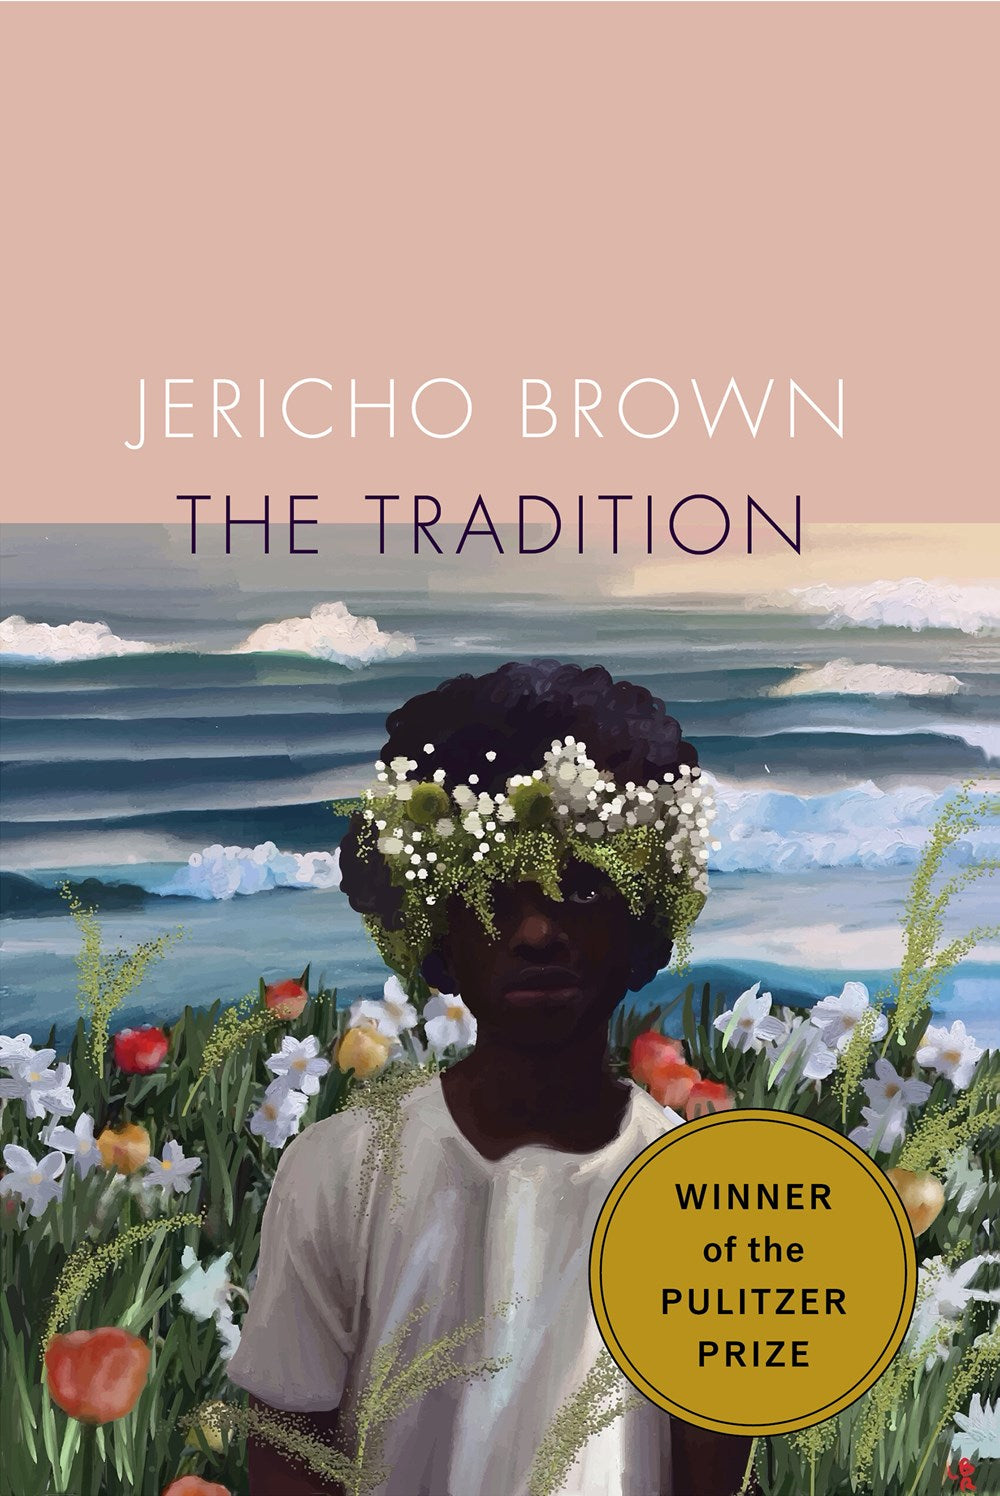 The Tradition by Jericho Brown - Book at Kavi Gupta Editions